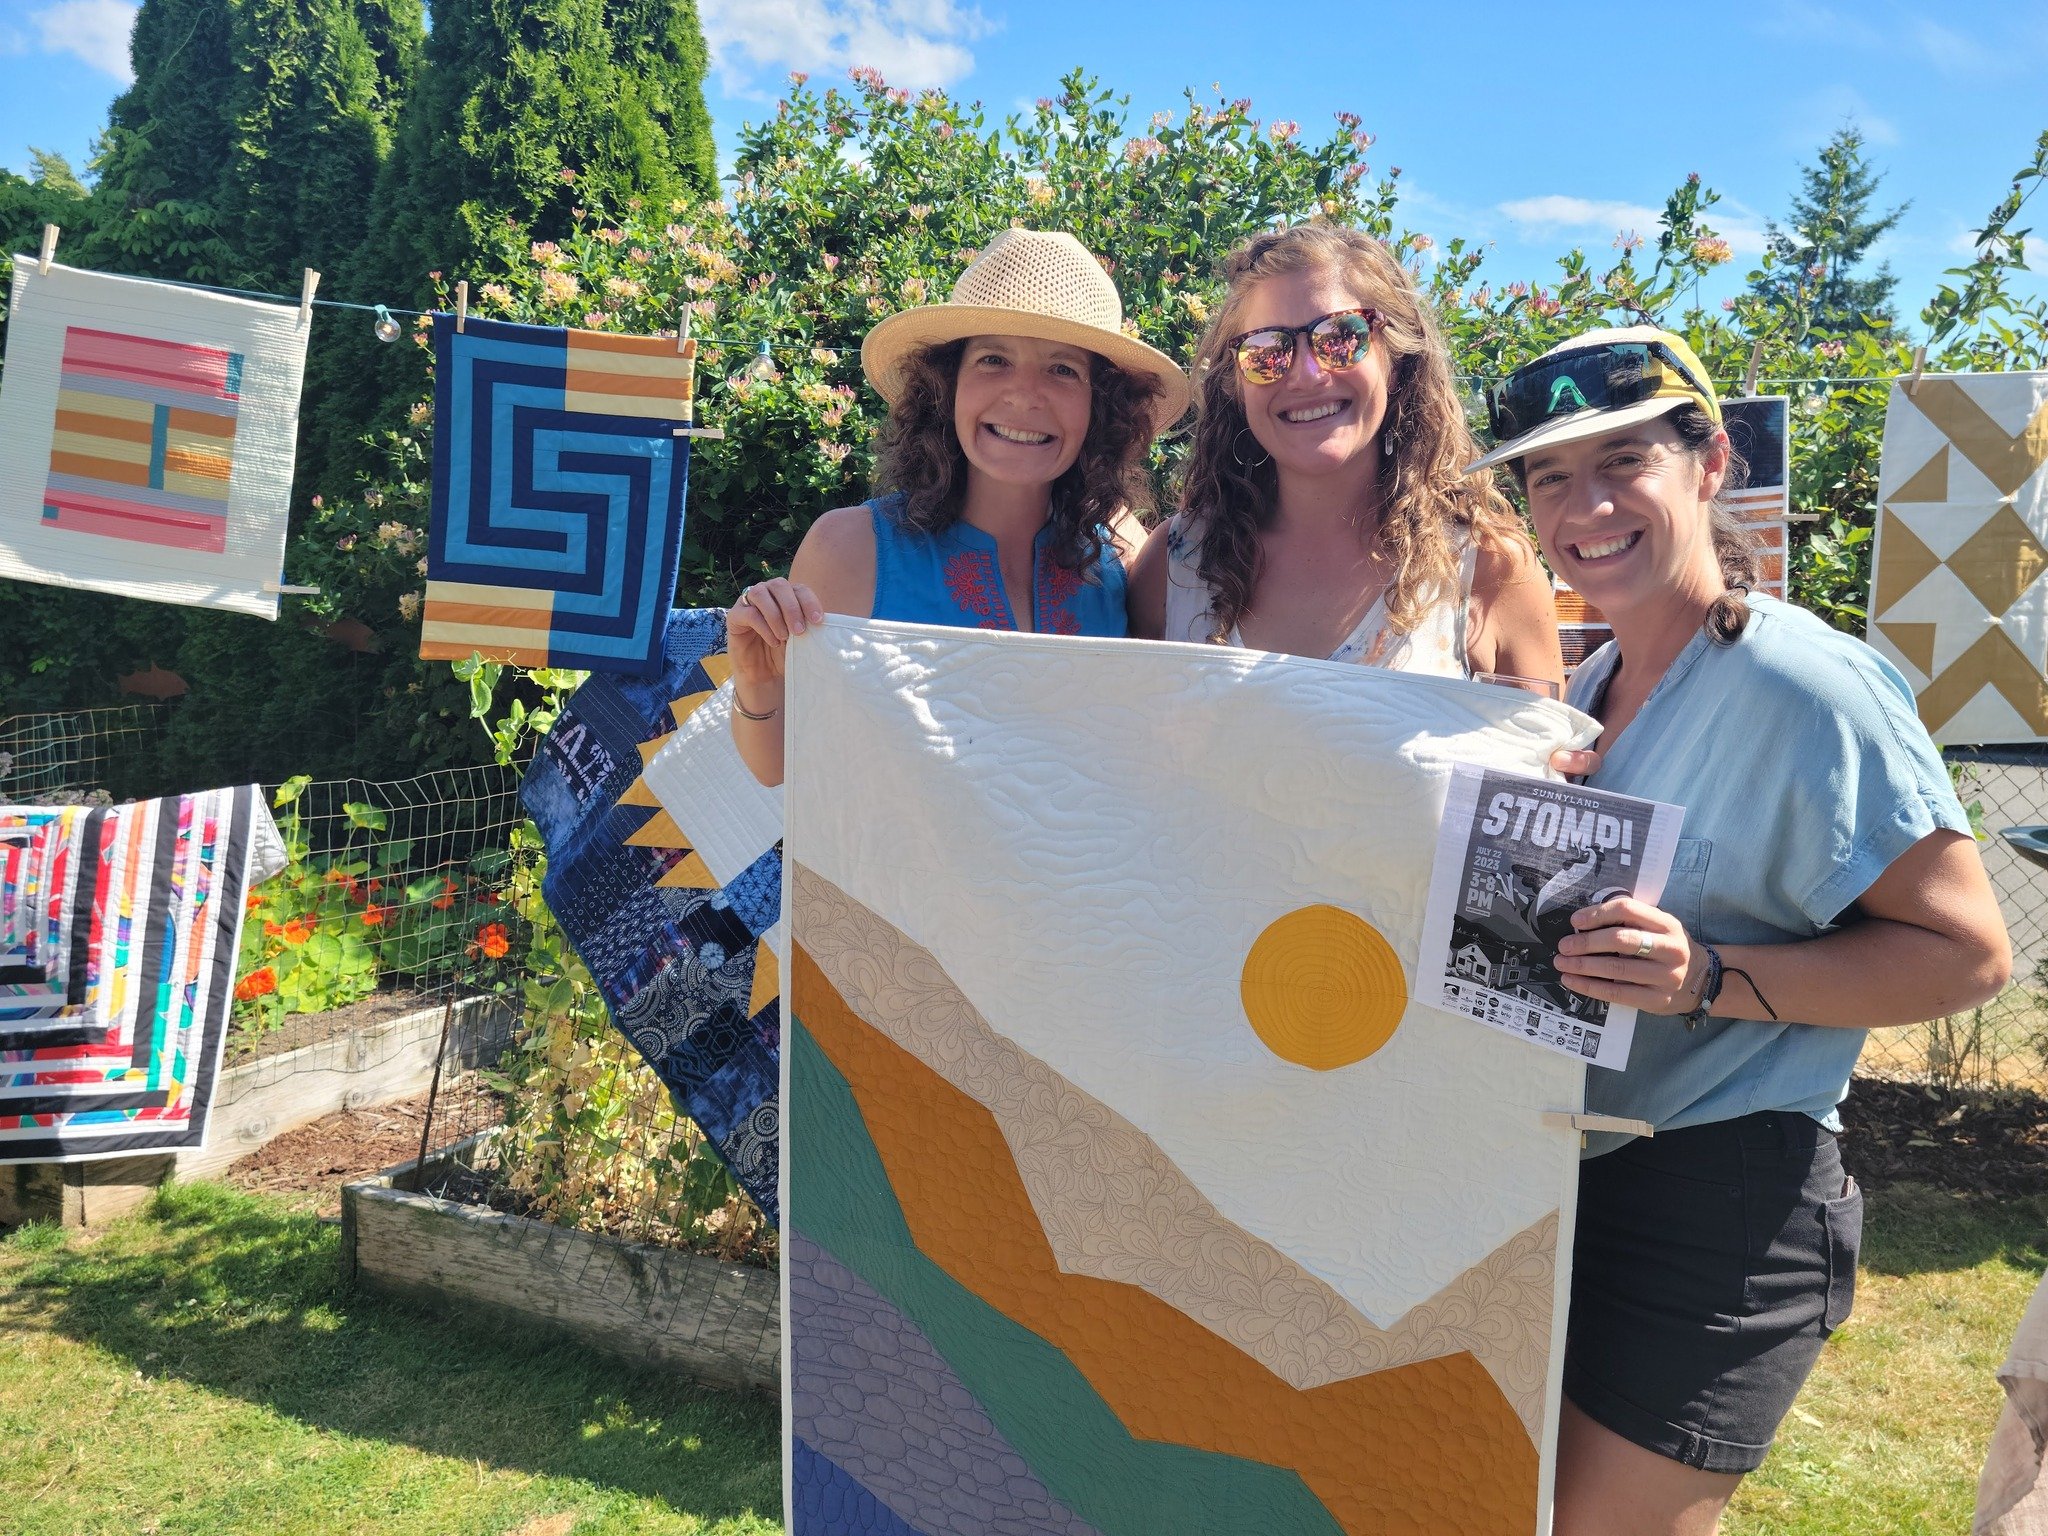 Sunshine and smiles at 'Art on Grant' from the 2023 Stomp! ☀️🐓 Sign up to be a part of the party, 🎉 and become an official host of this year's 16th Annual Sunnyland Stomp! Register by June 8th at 🔗: sunnylandstomp.com/hostsignup to get your Stomp 